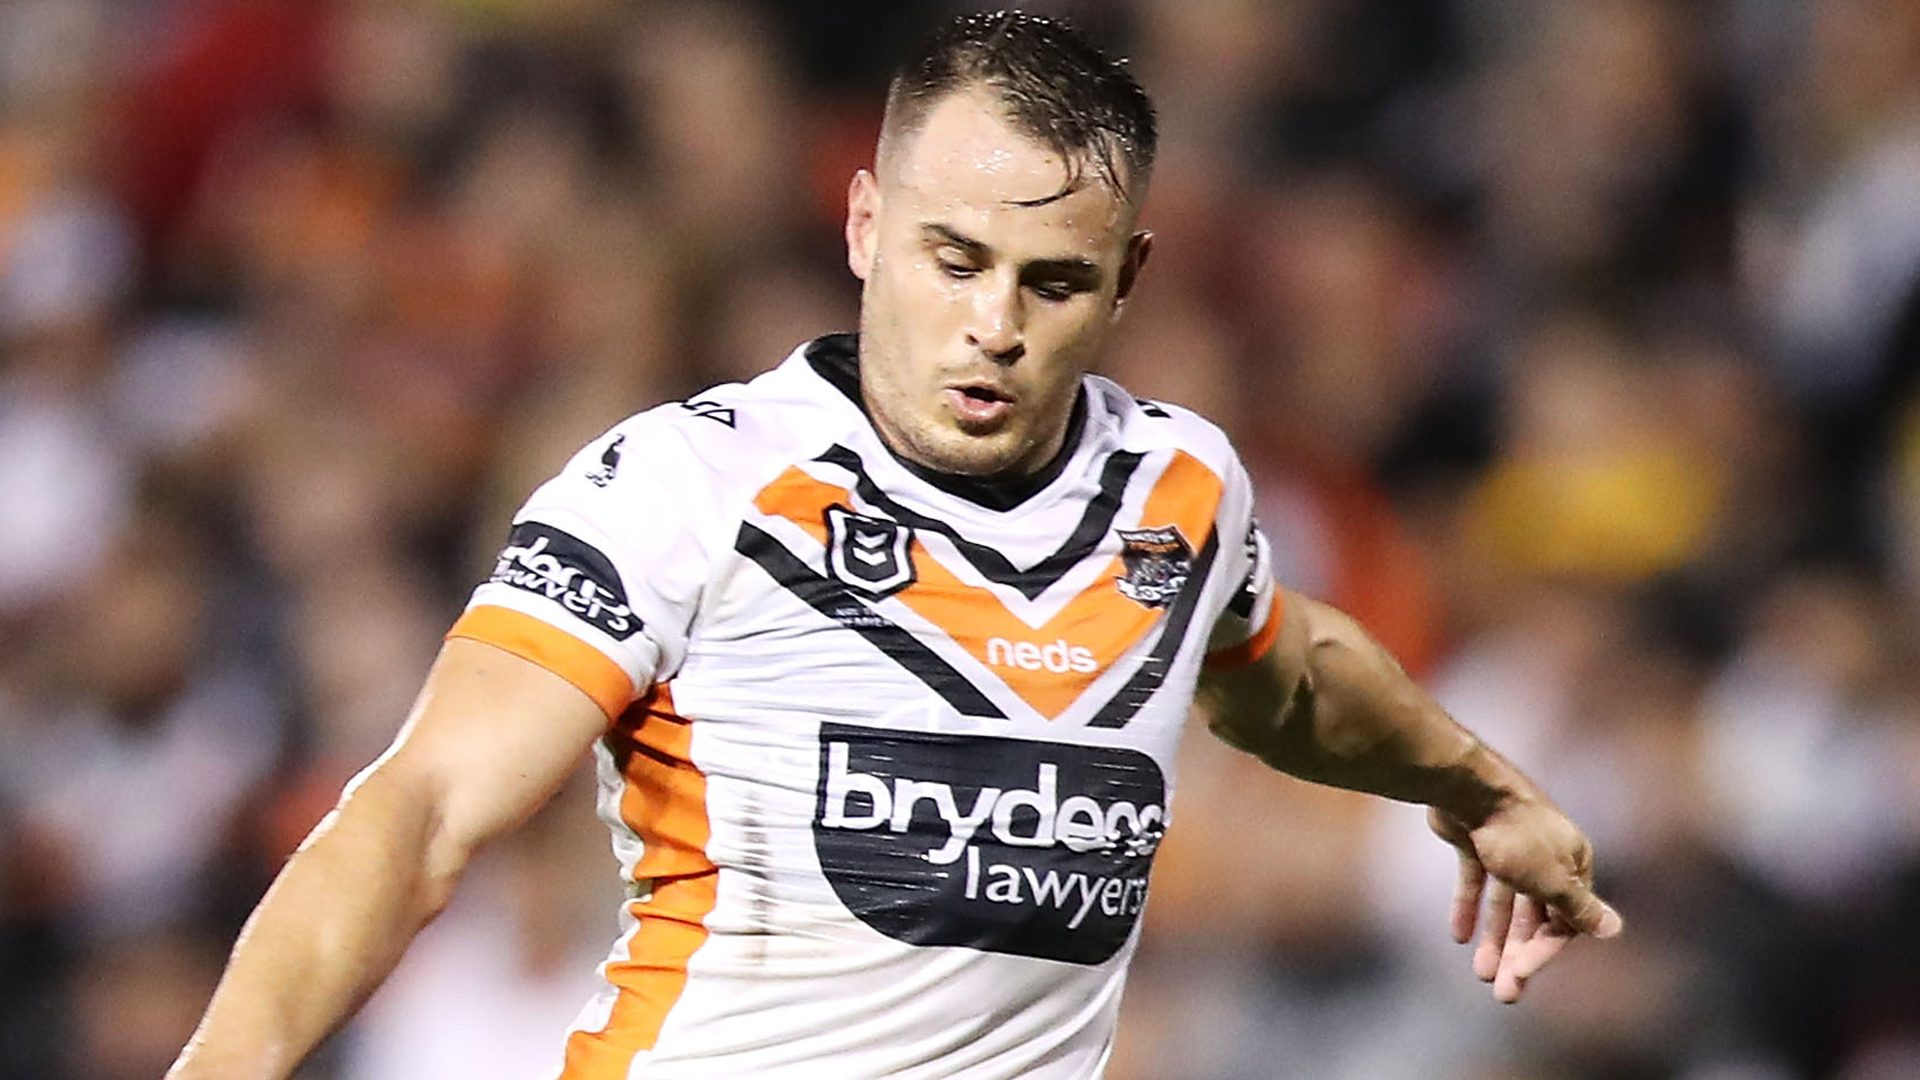 Wests Tigers confirmed on Wednesday that domestic violence charges against Josh Reynolds have been dropped.